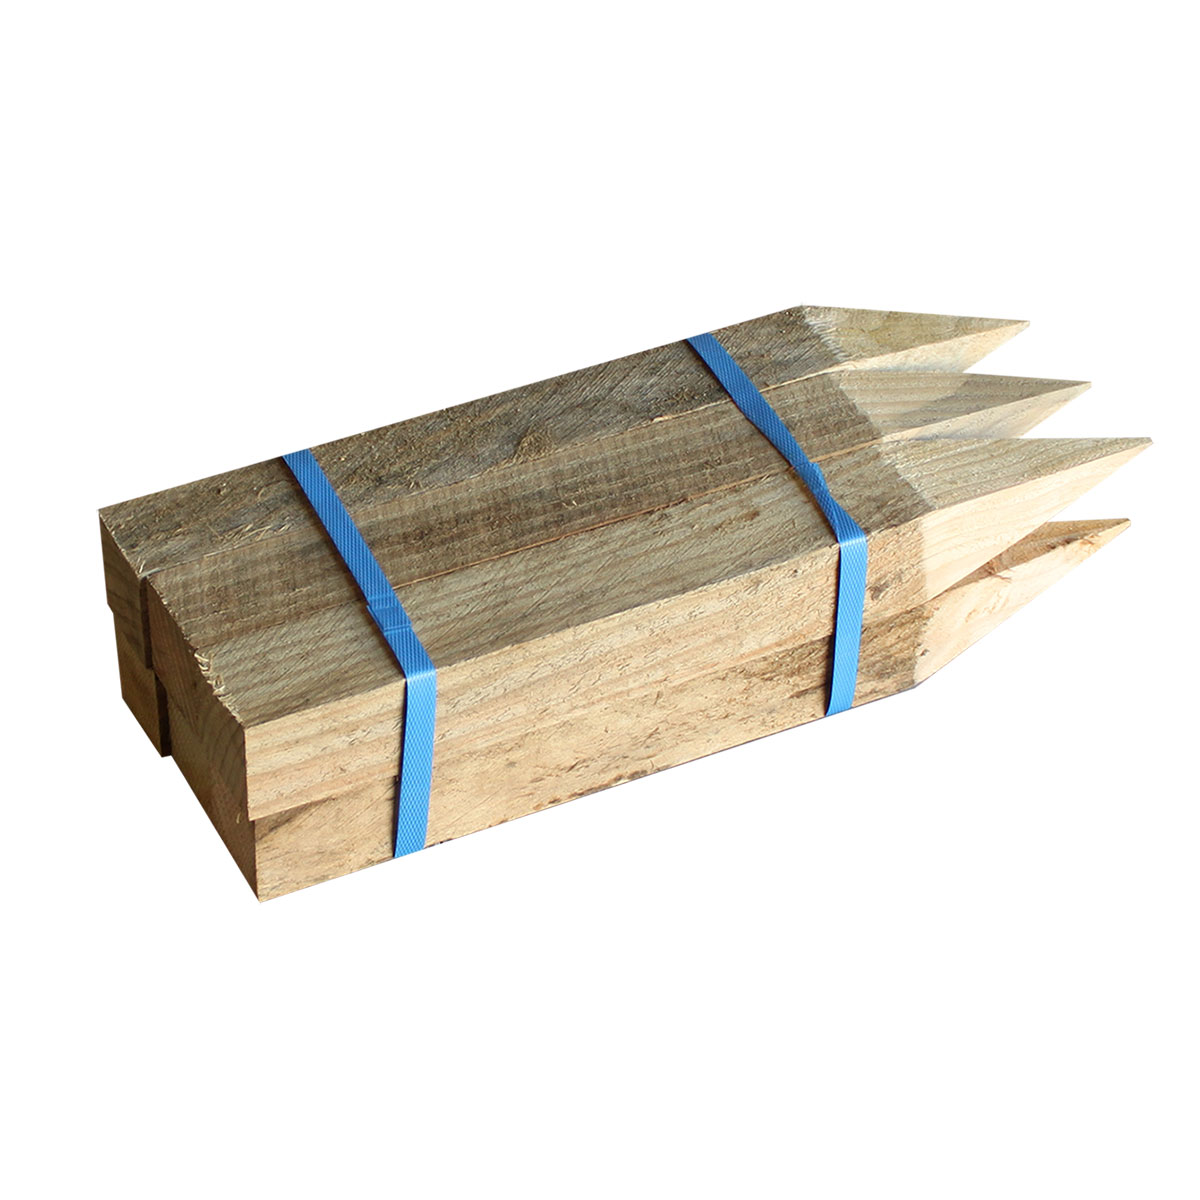 Treated Pine Pegs 50 x 50 x 450mm - 6 Pack